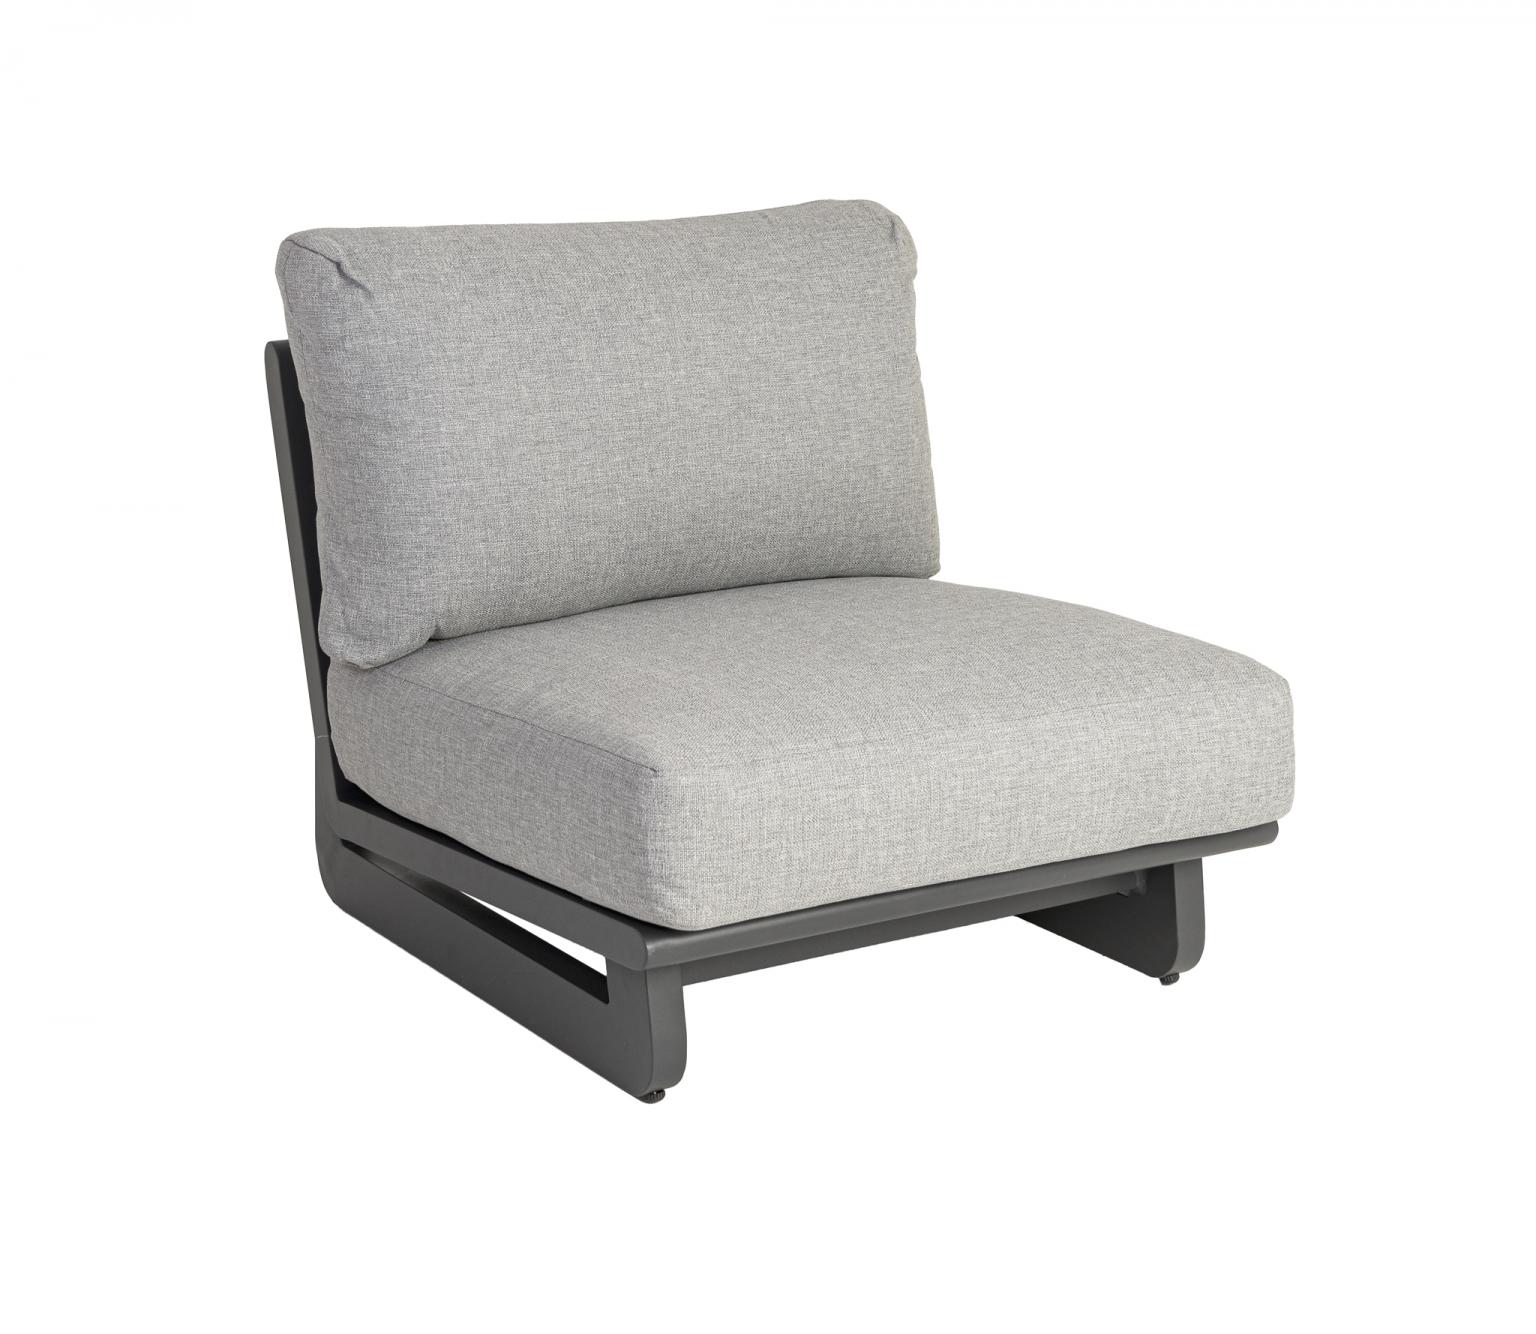 grey all weather garden sofa middle centre unit aluminium and cushions